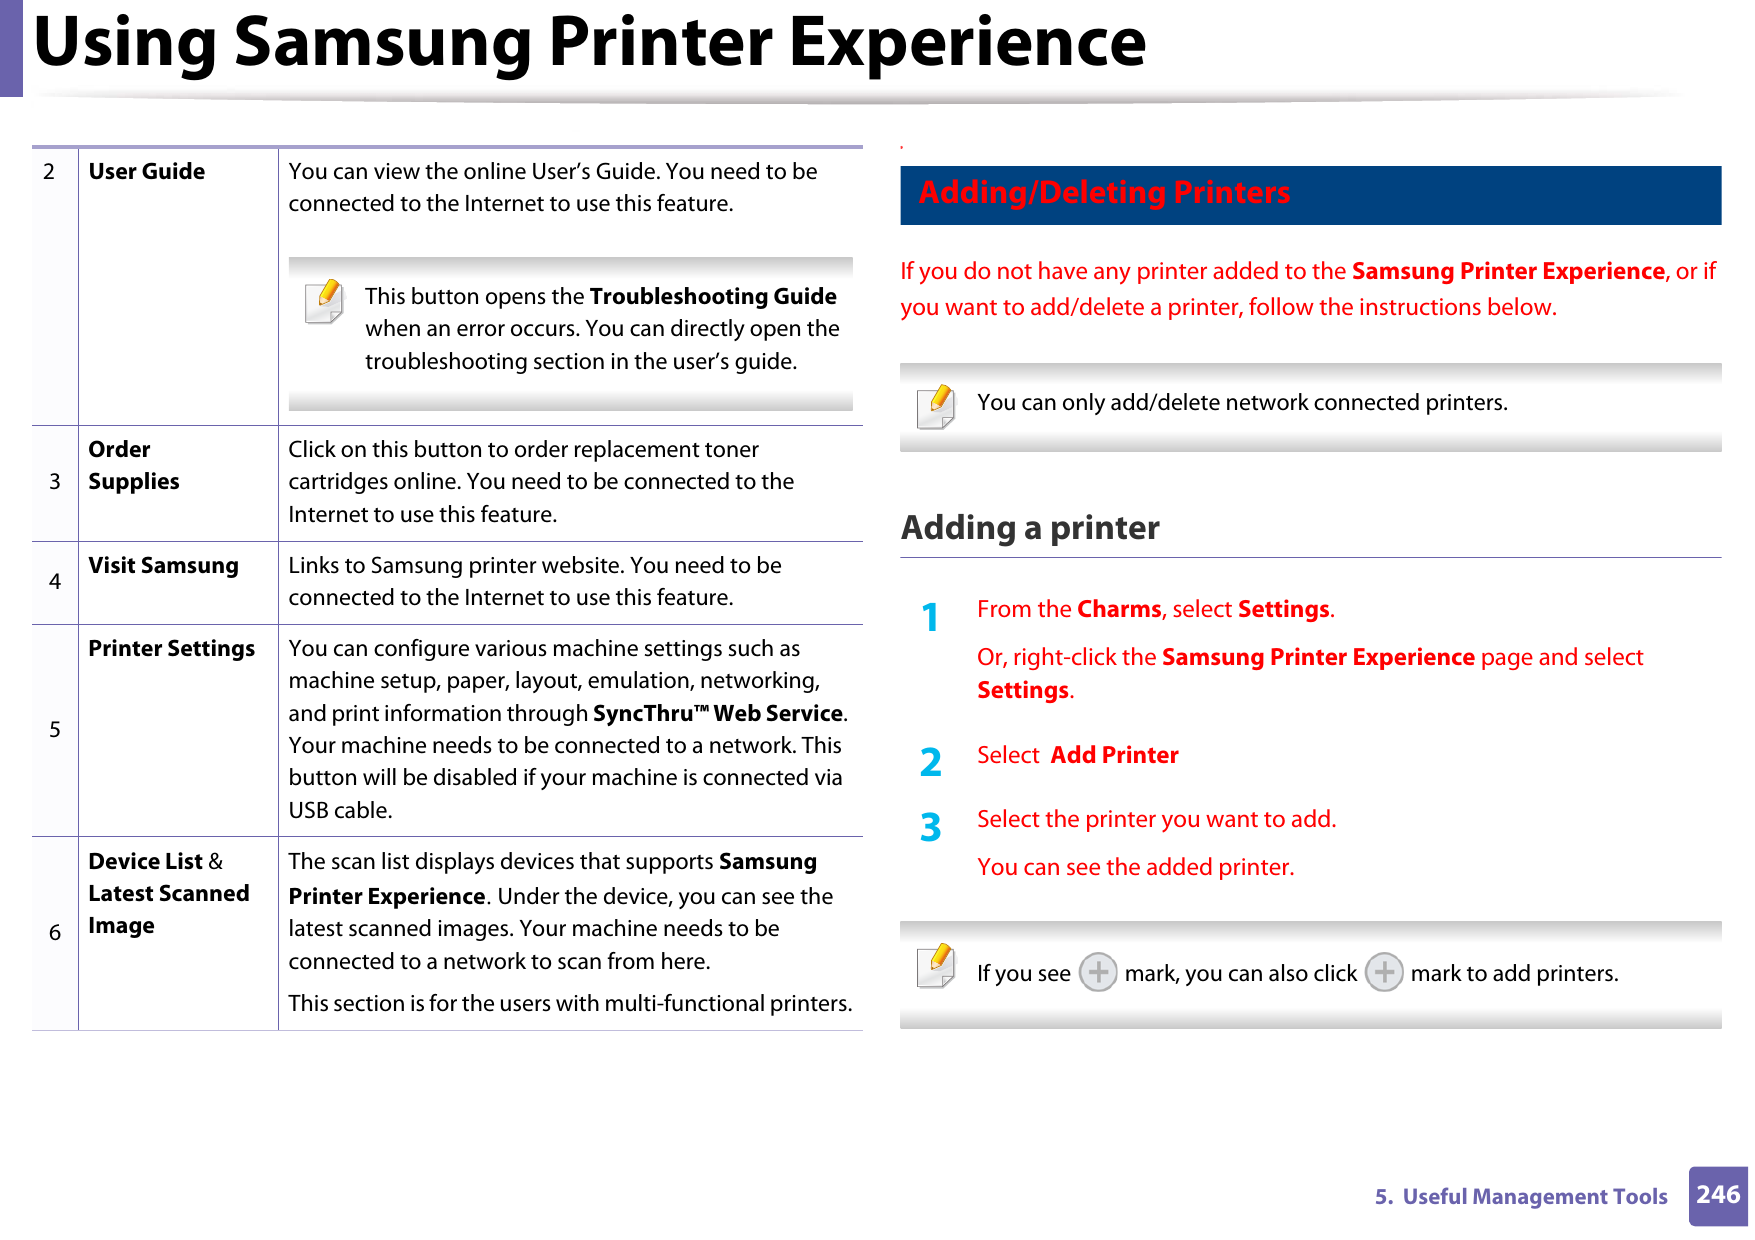 Using Samsung Printer Experience2465.  Useful Management Tools9 Adding/Deleting PrintersIf you do not have any printer added to the Samsung Printer Experience, or if you want to add/delete a printer, follow the instructions below.  You can only add/delete network connected printers. Adding a printer1From the Charms, select Settings.Or, right-click the Samsung Printer Experience page and select Settings.2  Select  Add Printer3  Select the printer you want to add.You can see the added printer. If you see   mark, you can also click   mark to add printers. 2User Guide You can view the online User’s Guide. You need to be connected to the Internet to use this feature. This button opens the Troubleshooting Guide when an error occurs. You can directly open the troubleshooting section in the user’s guide.  3Order SuppliesClick on this button to order replacement toner cartridges online. You need to be connected to the Internet to use this feature. 4Visit Samsung Links to Samsung printer website. You need to be connected to the Internet to use this feature.5Printer Settings You can configure various machine settings such as machine setup, paper, layout, emulation, networking, and print information through SyncThru™ Web Service. Your machine needs to be connected to a network. This button will be disabled if your machine is connected via USB cable.6Device List &amp; Latest Scanned ImageThe scan list displays devices that supports Samsung Printer Experience. Under the device, you can see the latest scanned images. Your machine needs to be connected to a network to scan from here. This section is for the users with multi-functional printers.